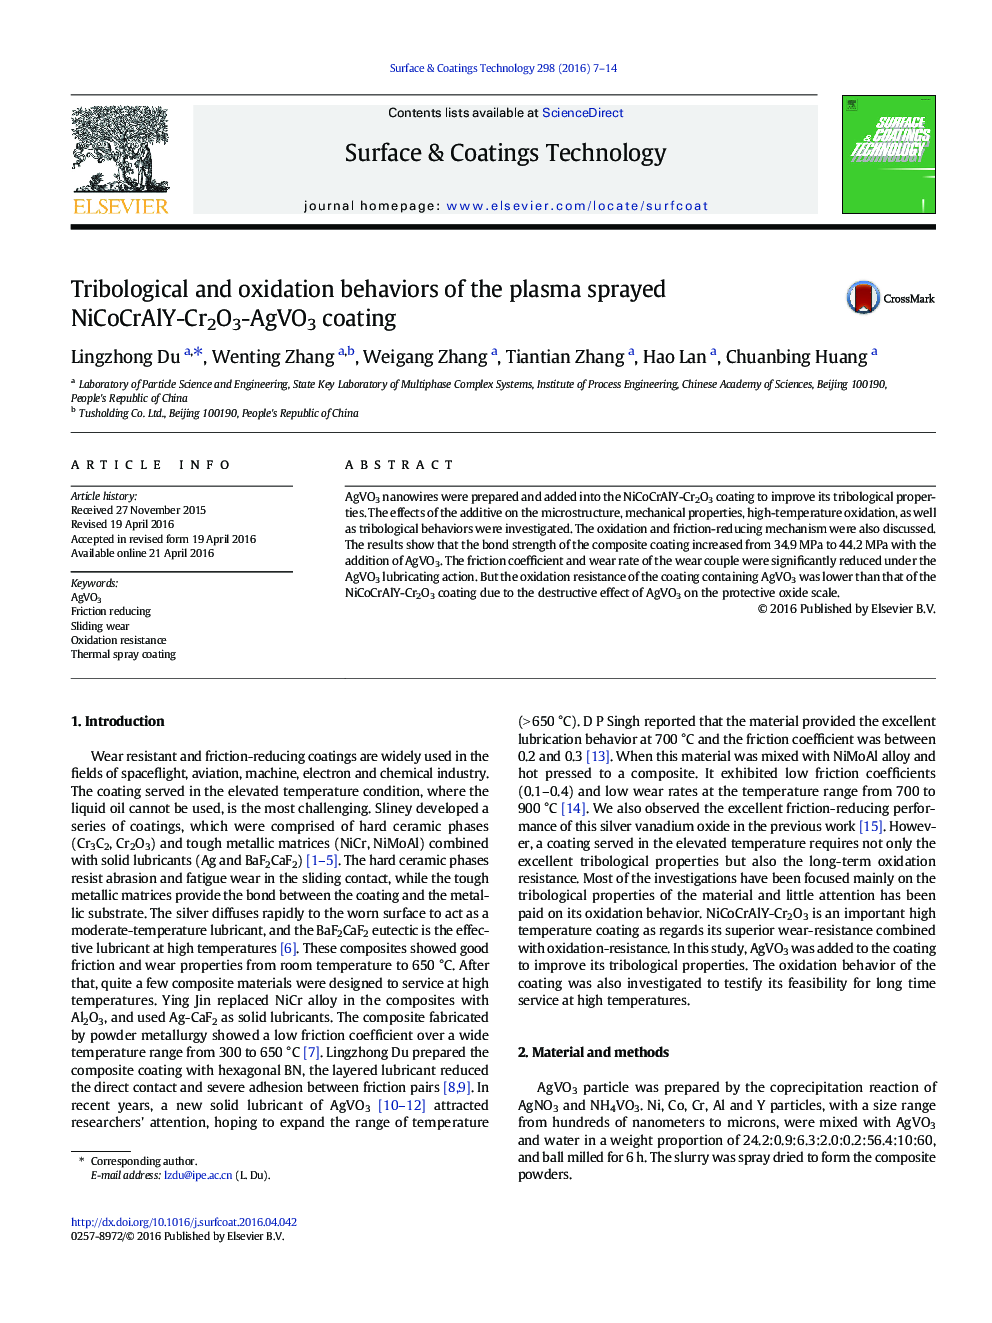 Tribological and oxidation behaviors of the plasma sprayed NiCoCrAlY-Cr2O3-AgVO3 coating